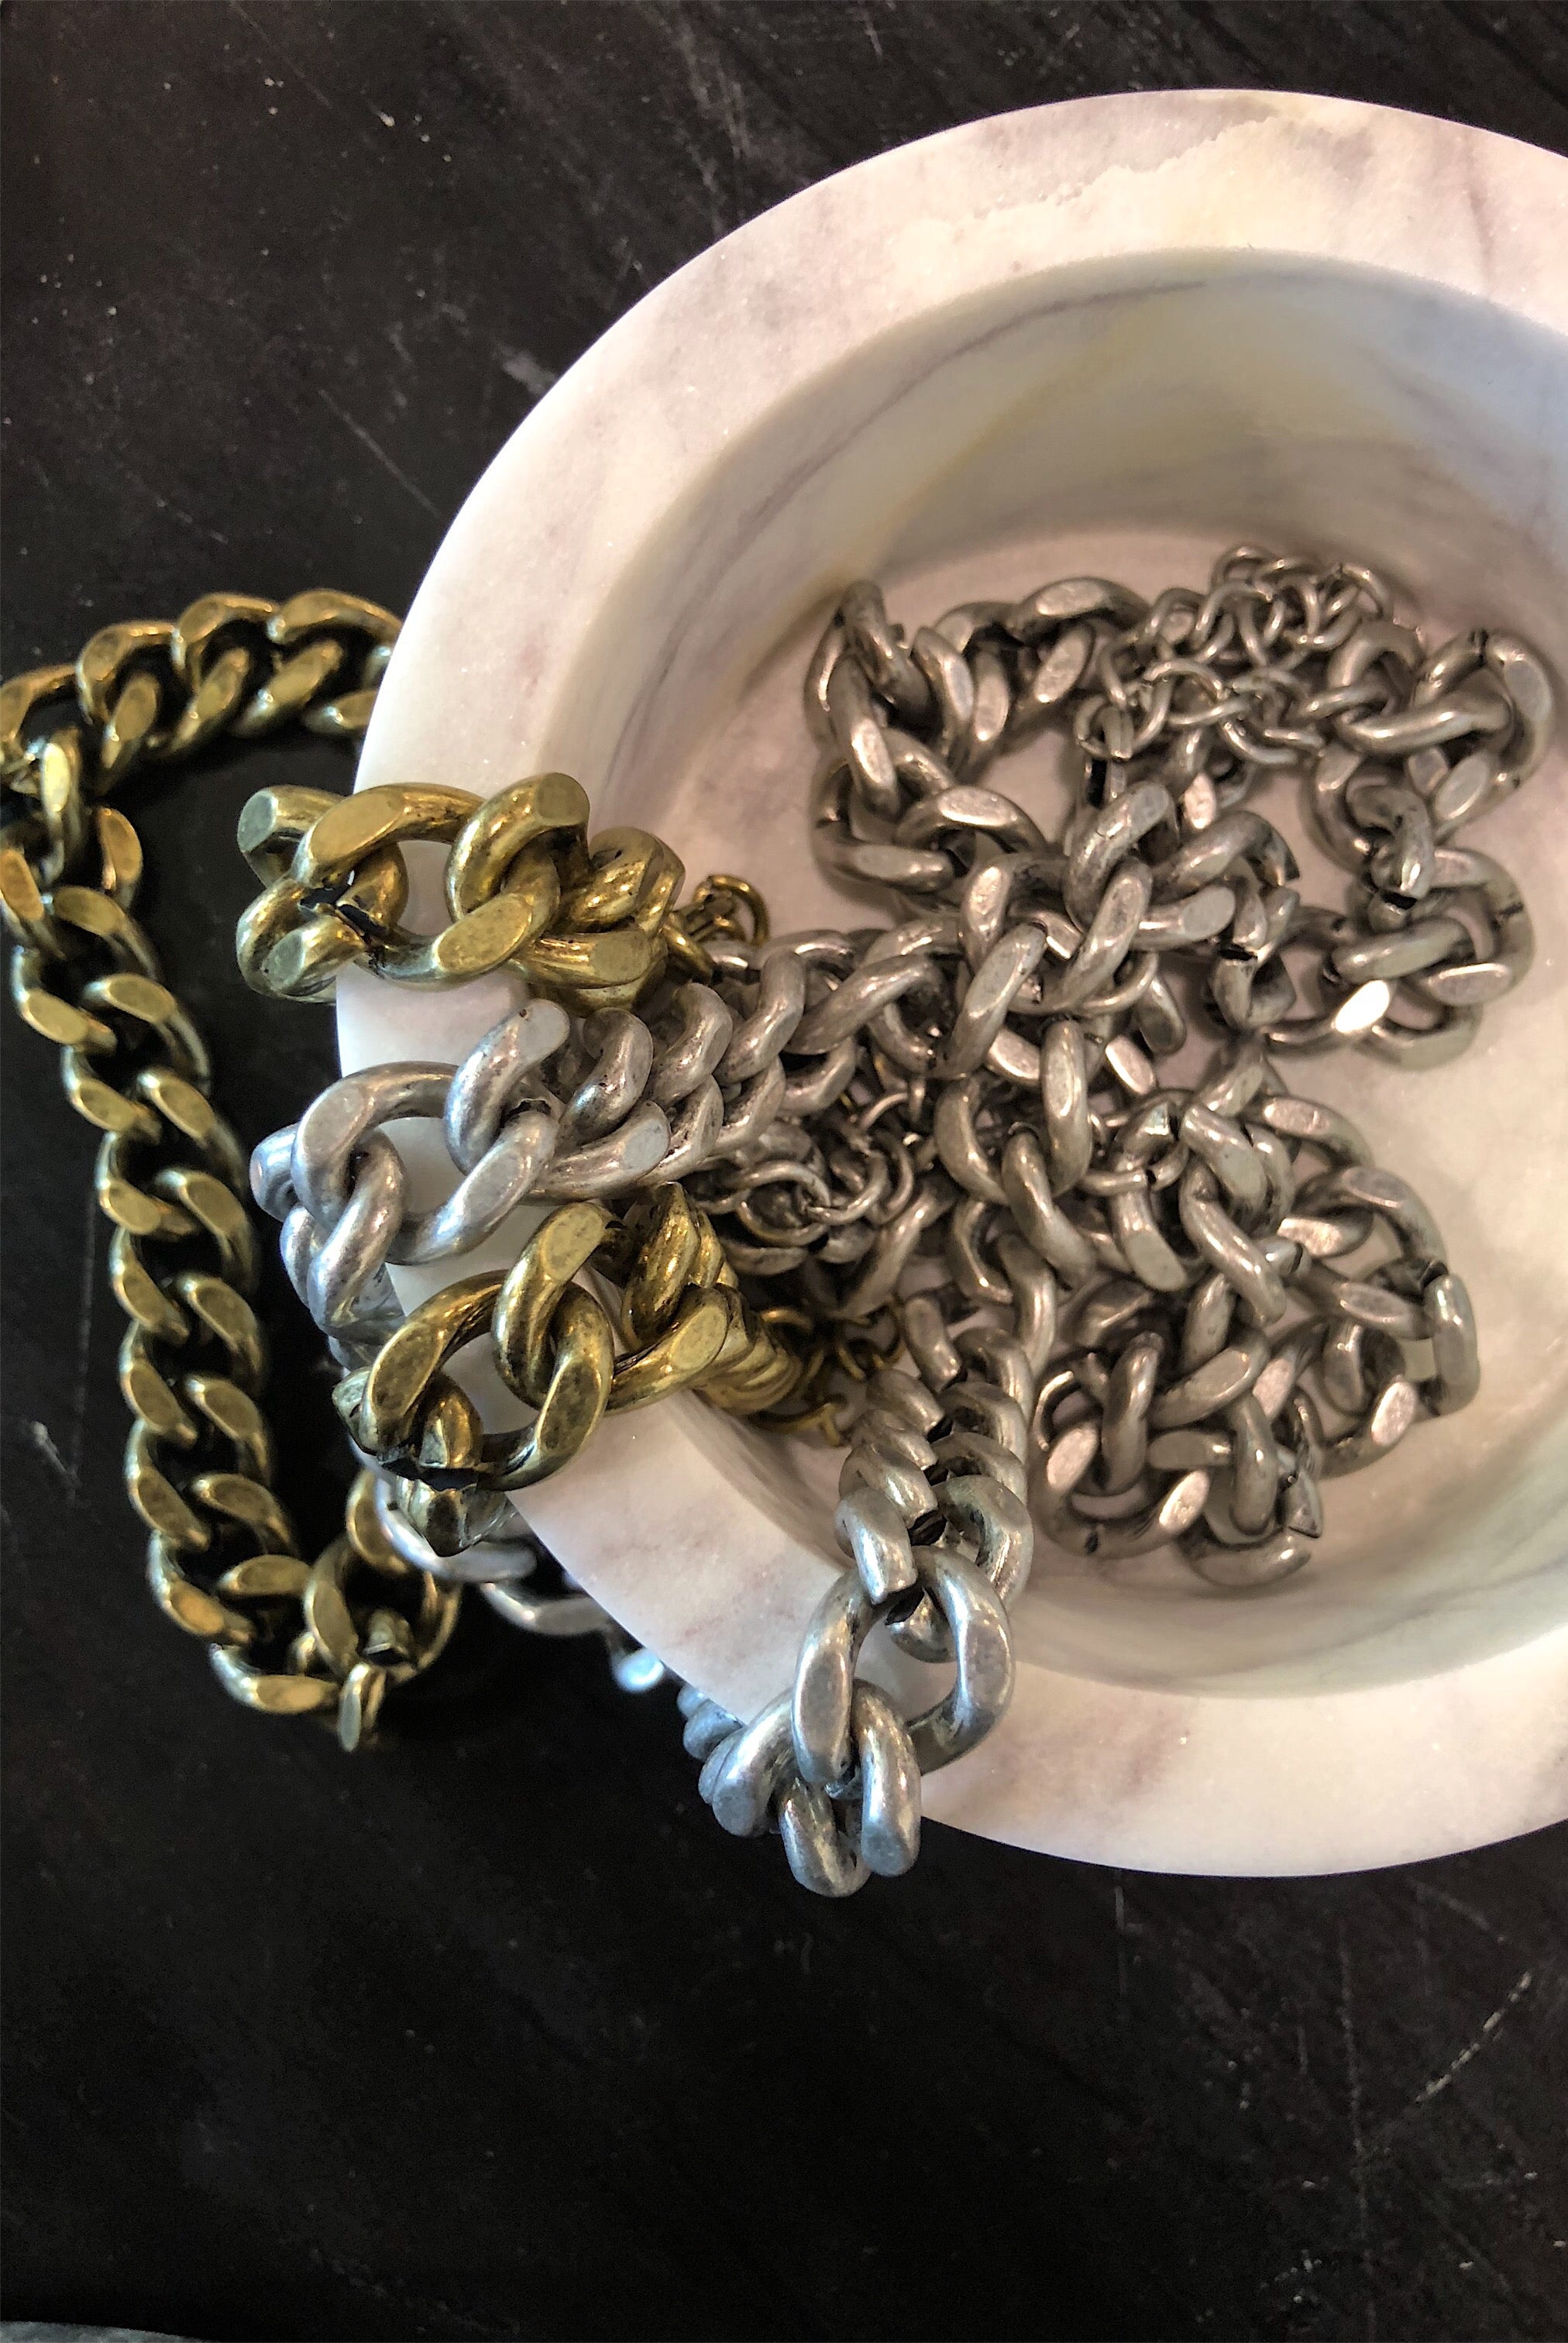 Heavy Chain Necklace